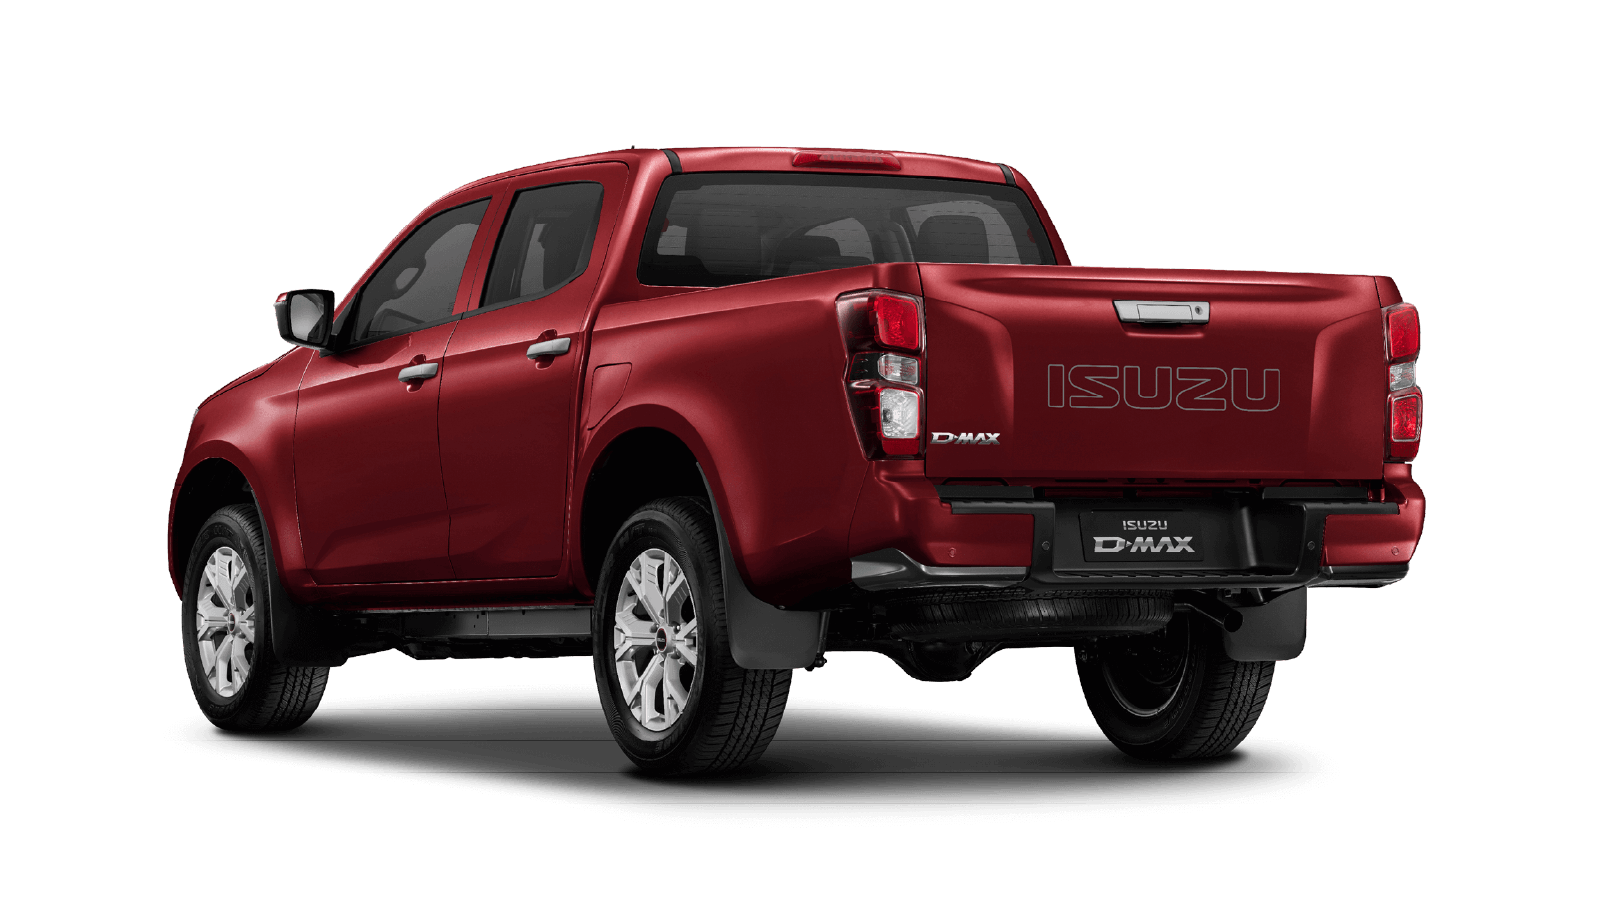 Isuzu D-Max DL20 Double Cab Spinel Red rear